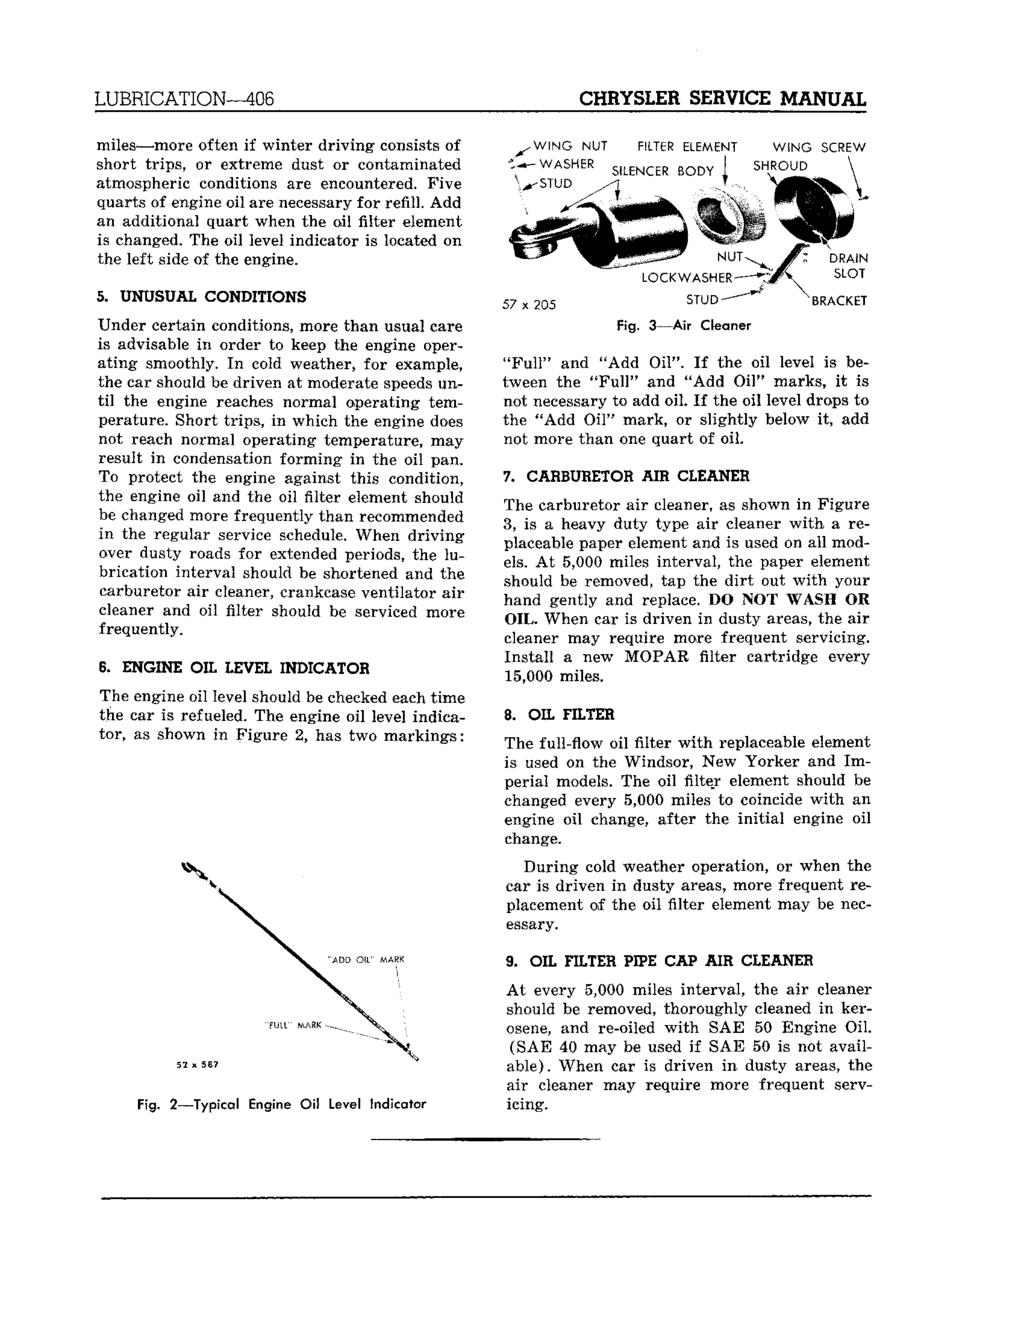 LUBRICATION 406 CHHYSLEH SERVICE MANUAL miles- more often if winter driving consists of short trips, or extreme dust or contaminated atmospheric conditions are encountered.